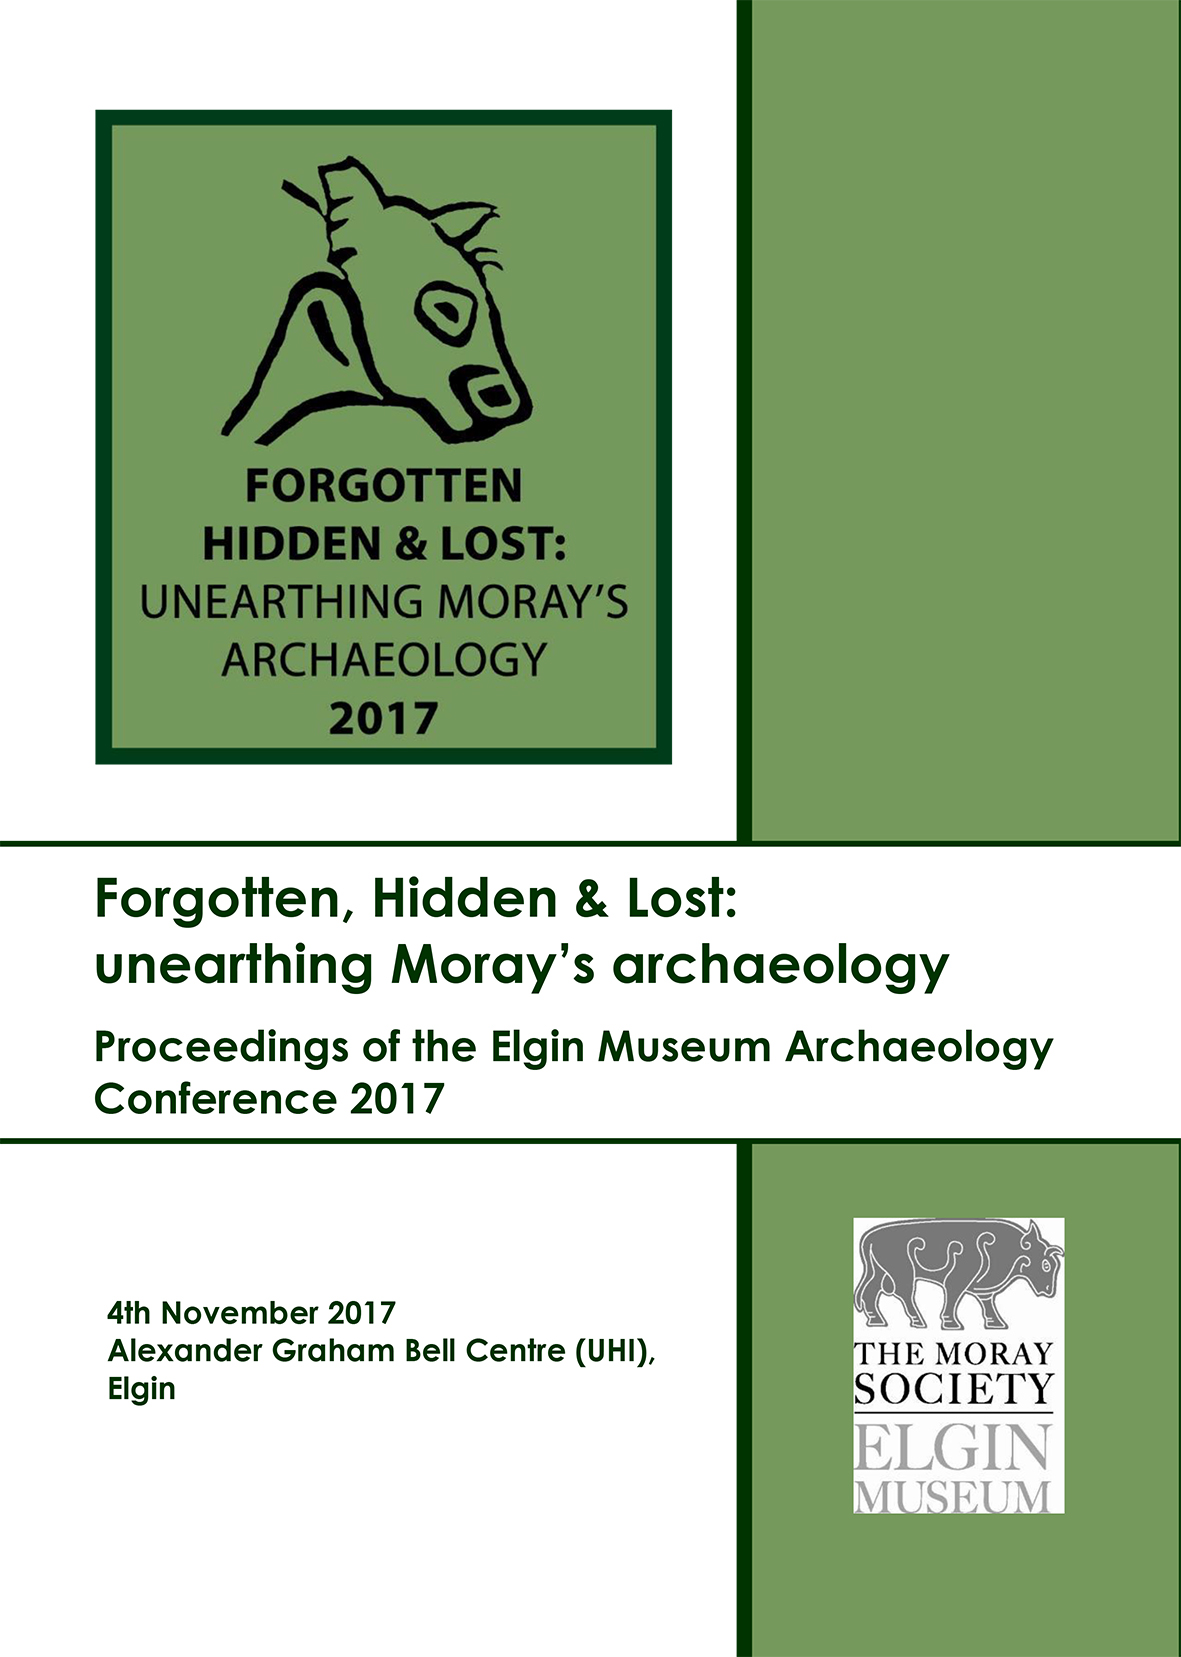 Proceedings of the Elgin Museum Archaeology Conference 2017